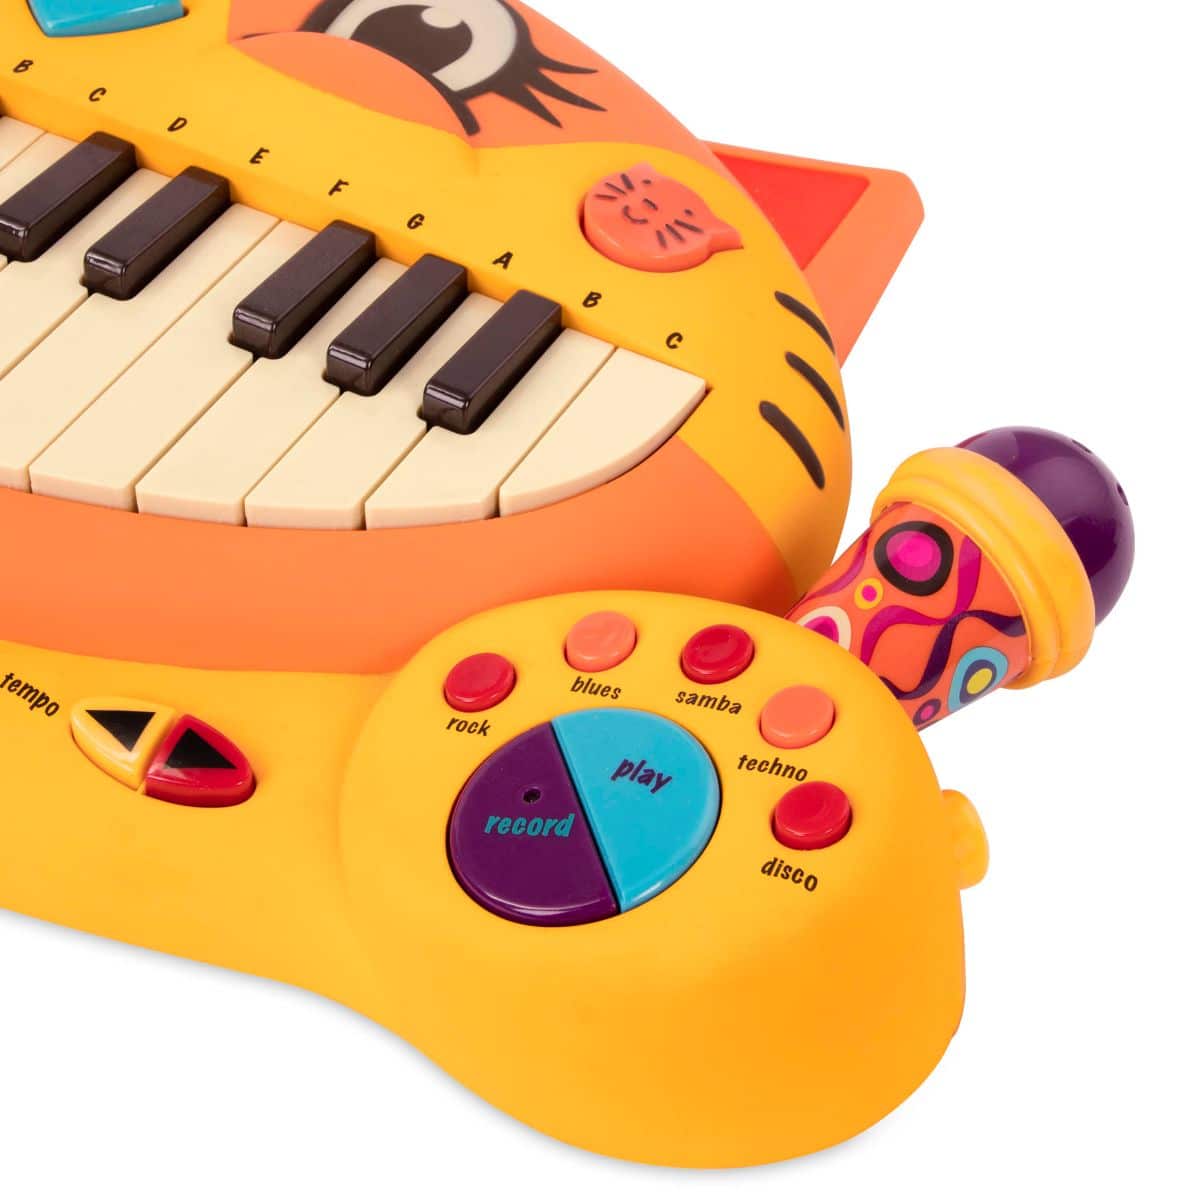 B Meowsic Keyboard Cat Piano and Microphone Musical Instrument Kids Toy 